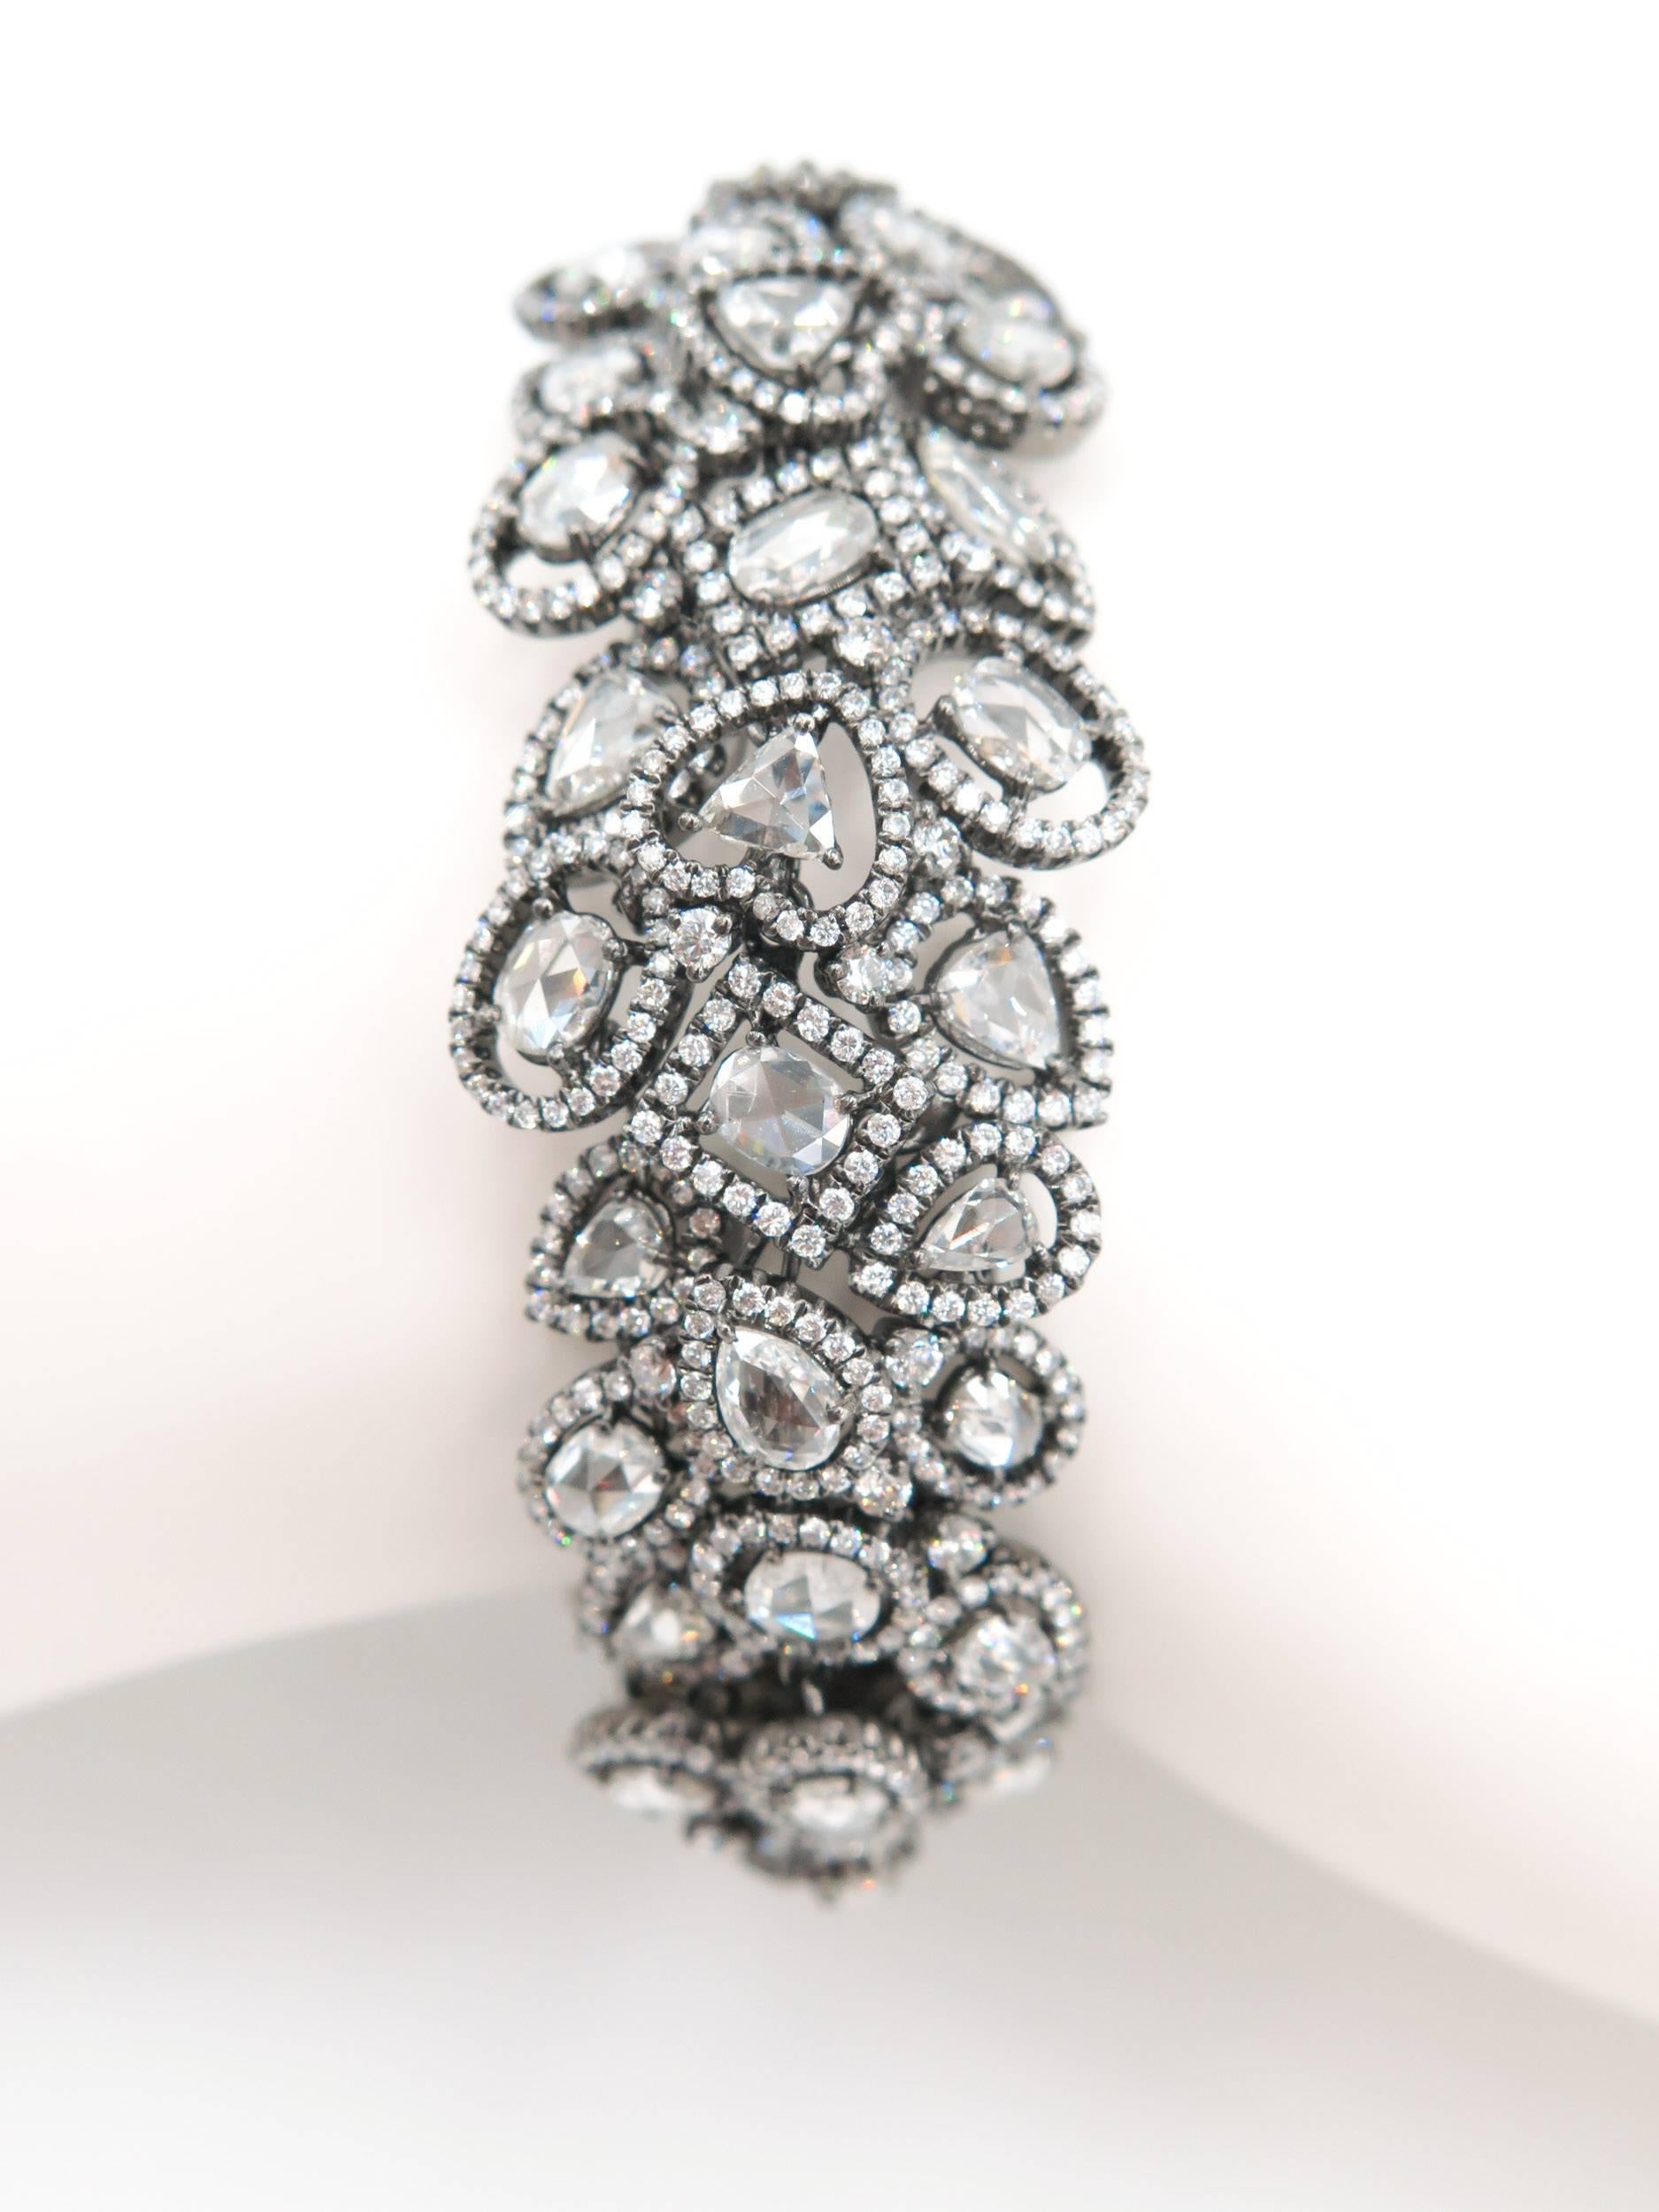 This magnificent bracelet sparkles with diamonds individually set with halos . Crafted in black rhodium-treated 18K white gold and boasts a remarkable design comprised of 21.22 carats of rose-cut white diamonds of different shapes and size.
